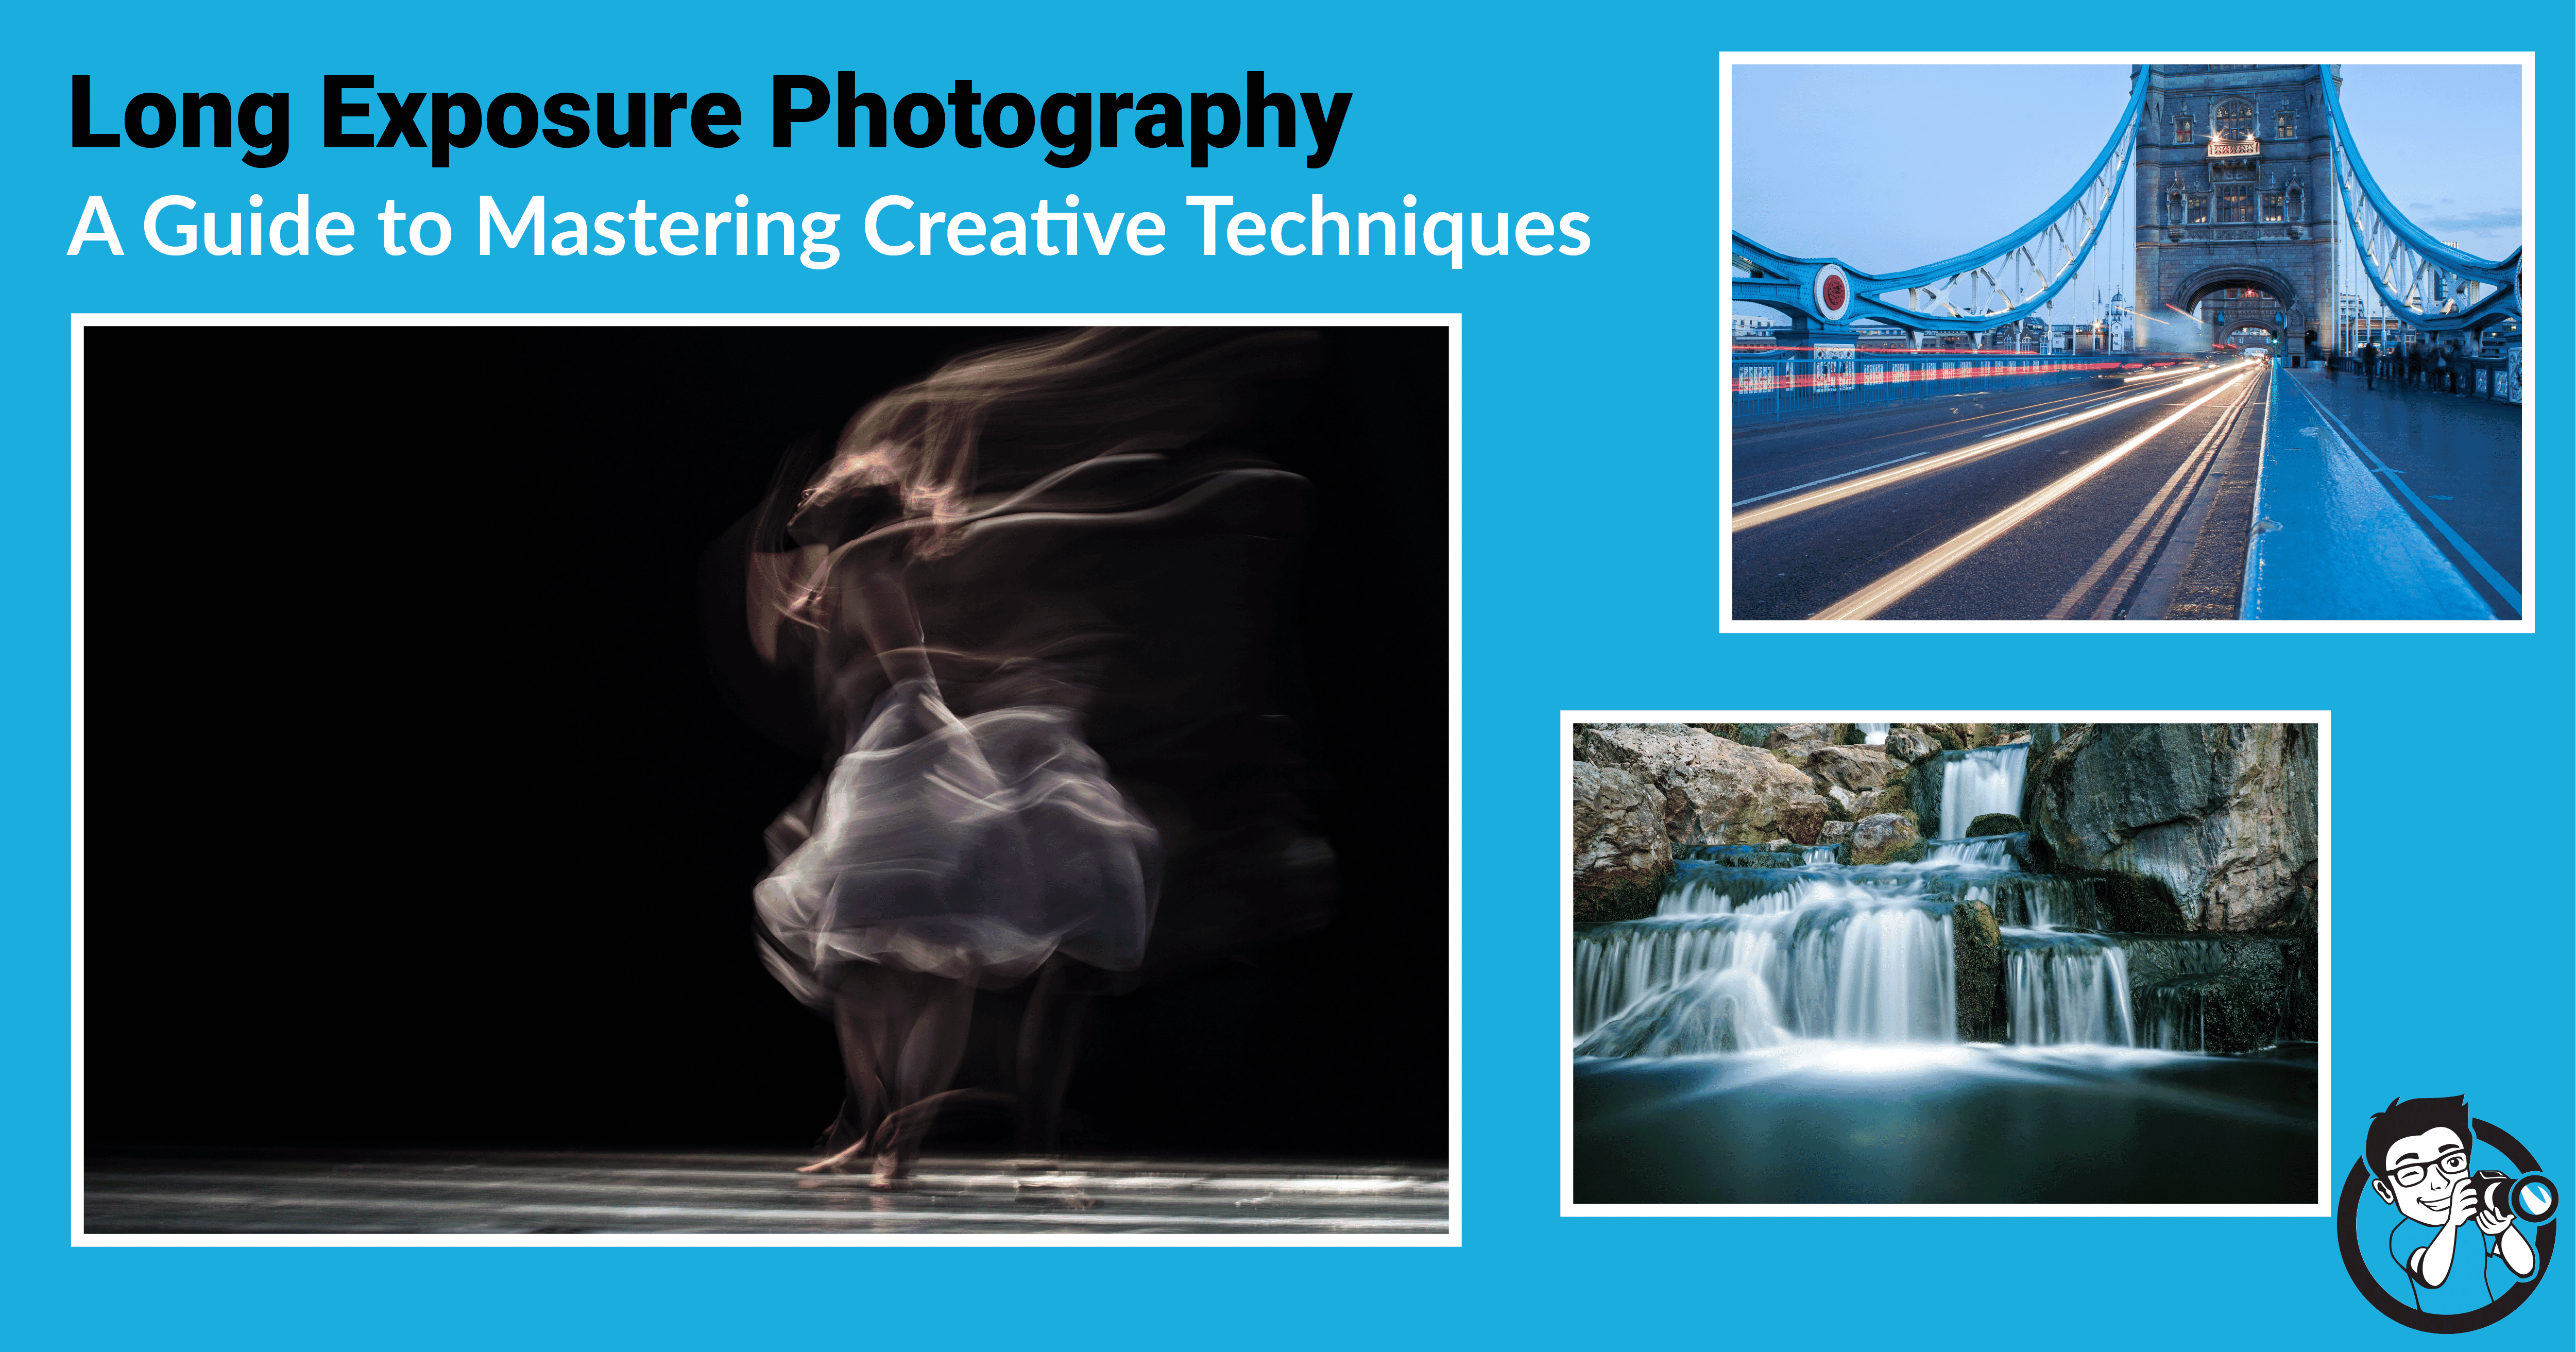 Long Exposure Photography: A Guide to Mastering Creative Techniques